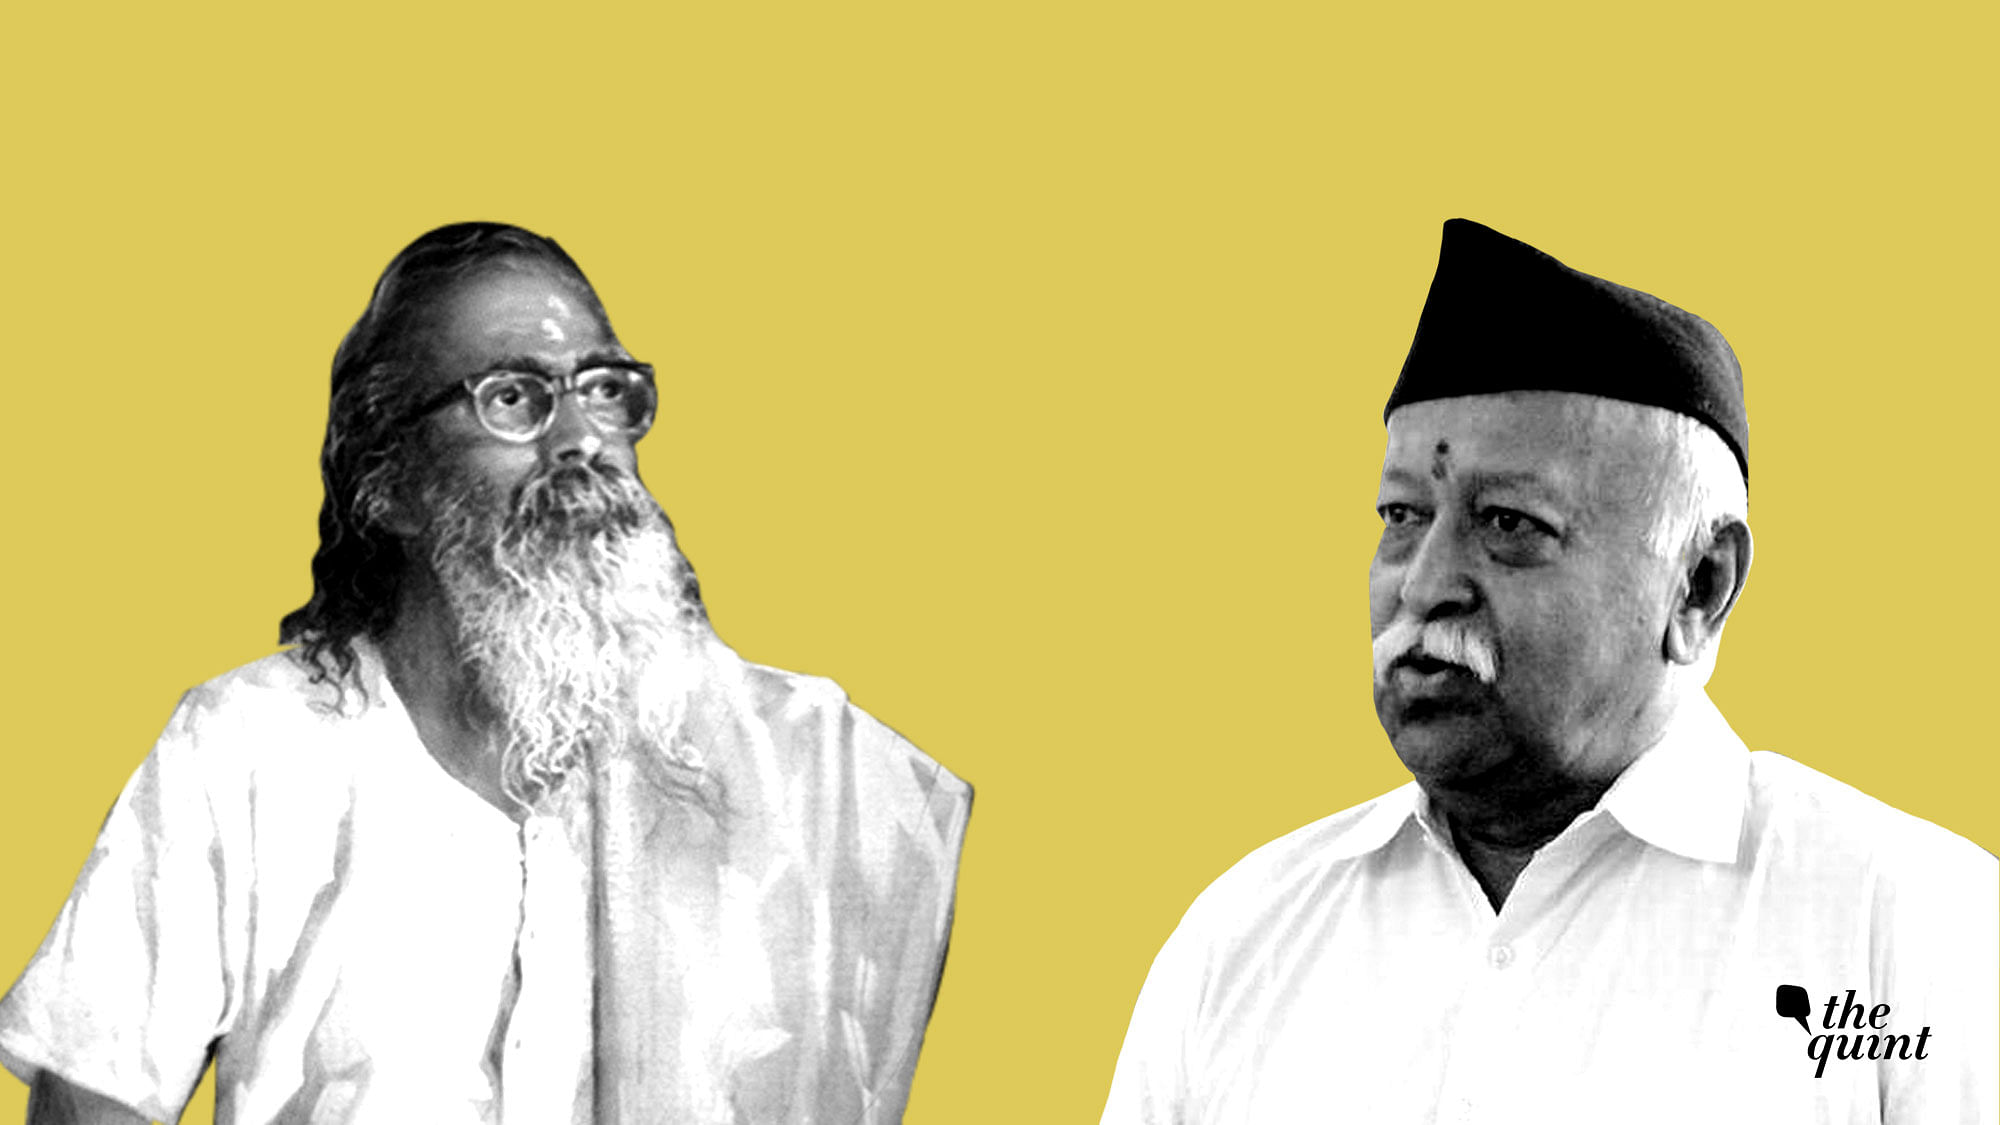 RSS chief Mohan Bhagwat didn’t himself speak about the longest serving RSS Sarsanghchalak MS Golwalkar (left) during a recently concluded 3-day event.